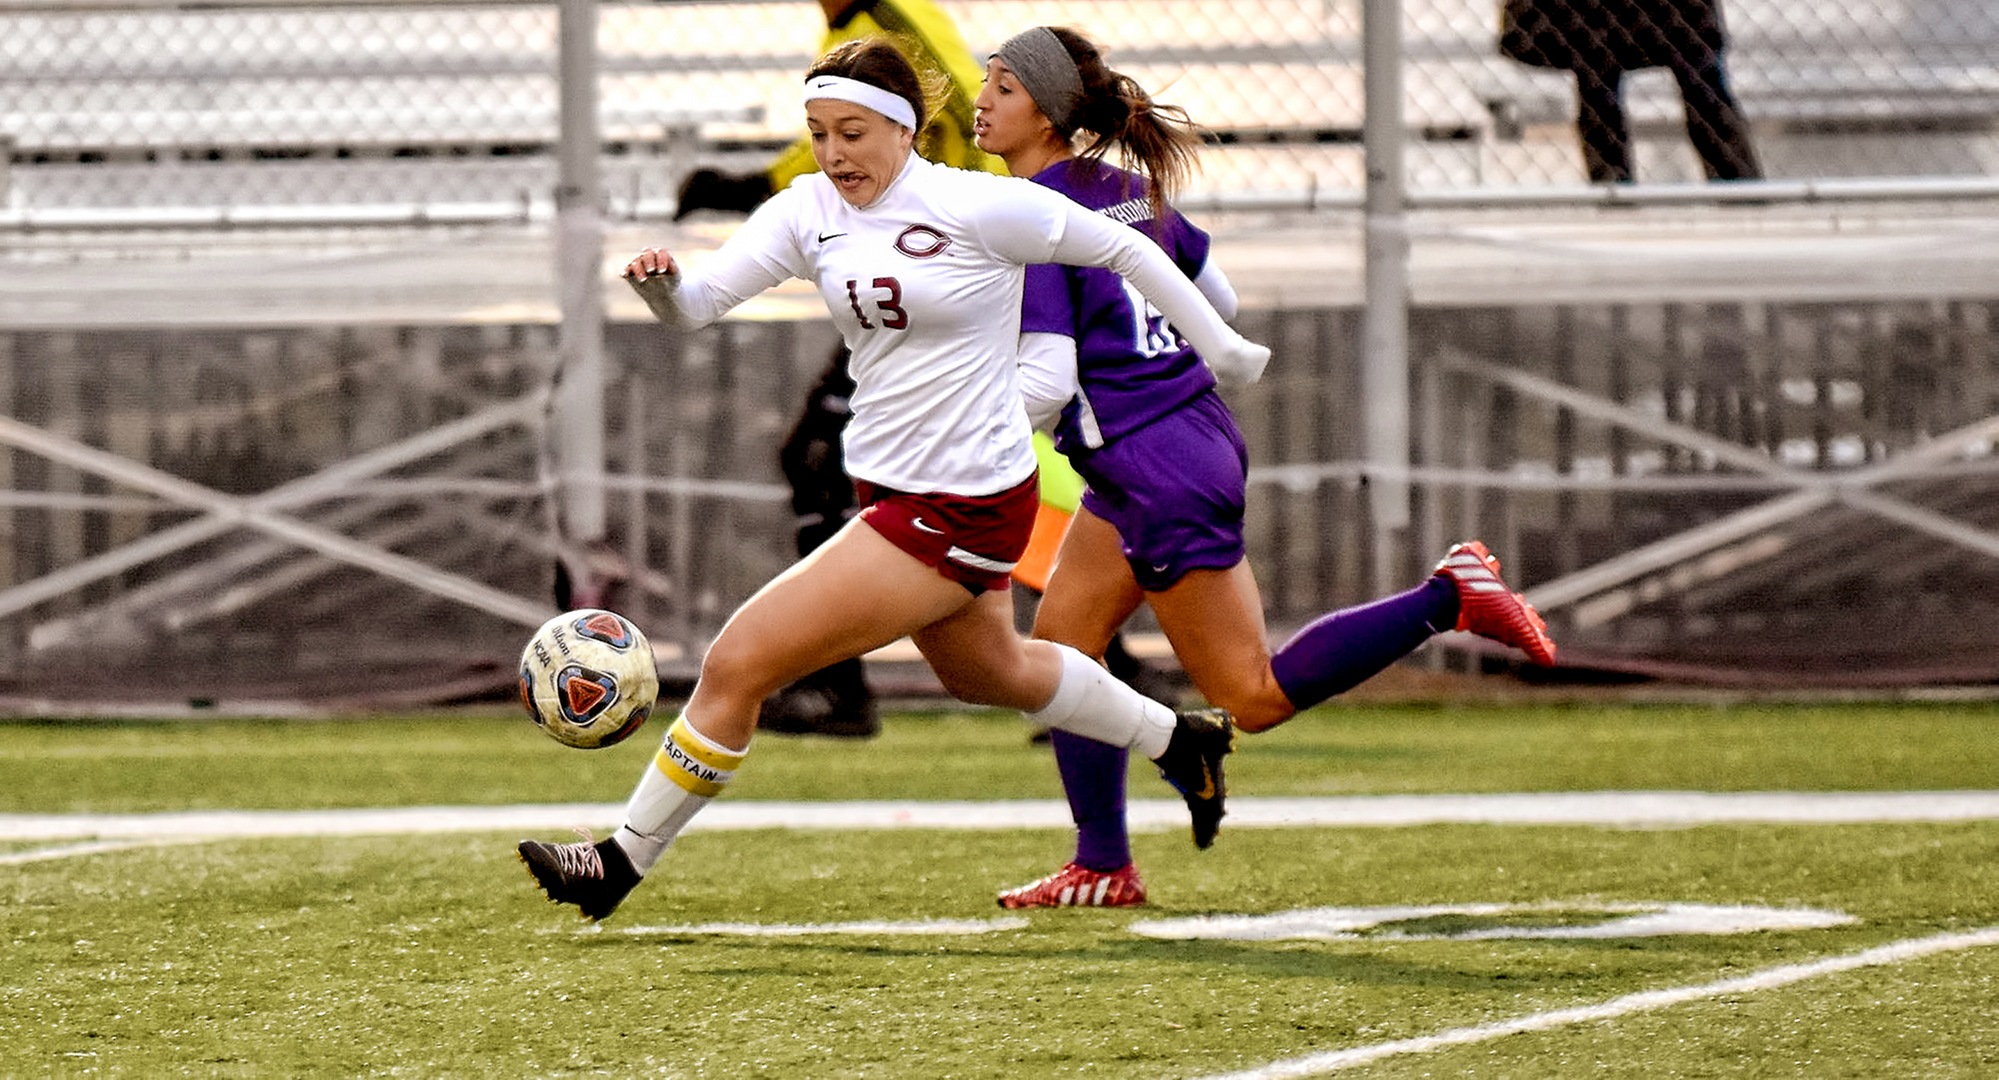 Senior Kalli Baarstad gets control of the ball and heads toward the St. Thomas goal in the first half of the Cobbers' game with the Tommies.